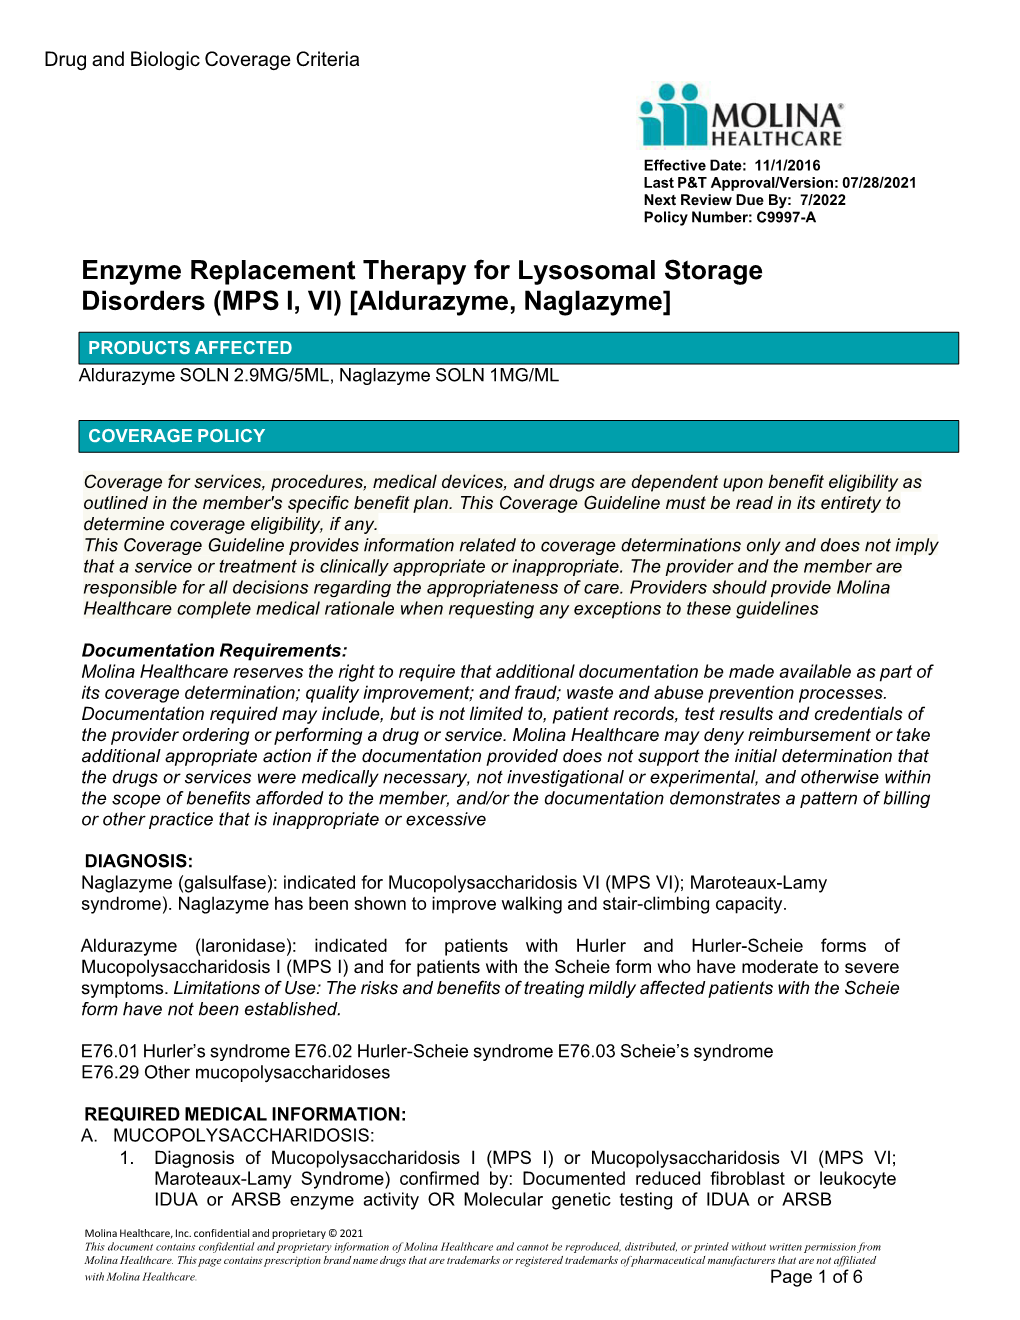 Enzyme Replacement Therapy for Lysosomal Storage Disorders (MPS I, VI) [Aldurazyme, Naglazyme]